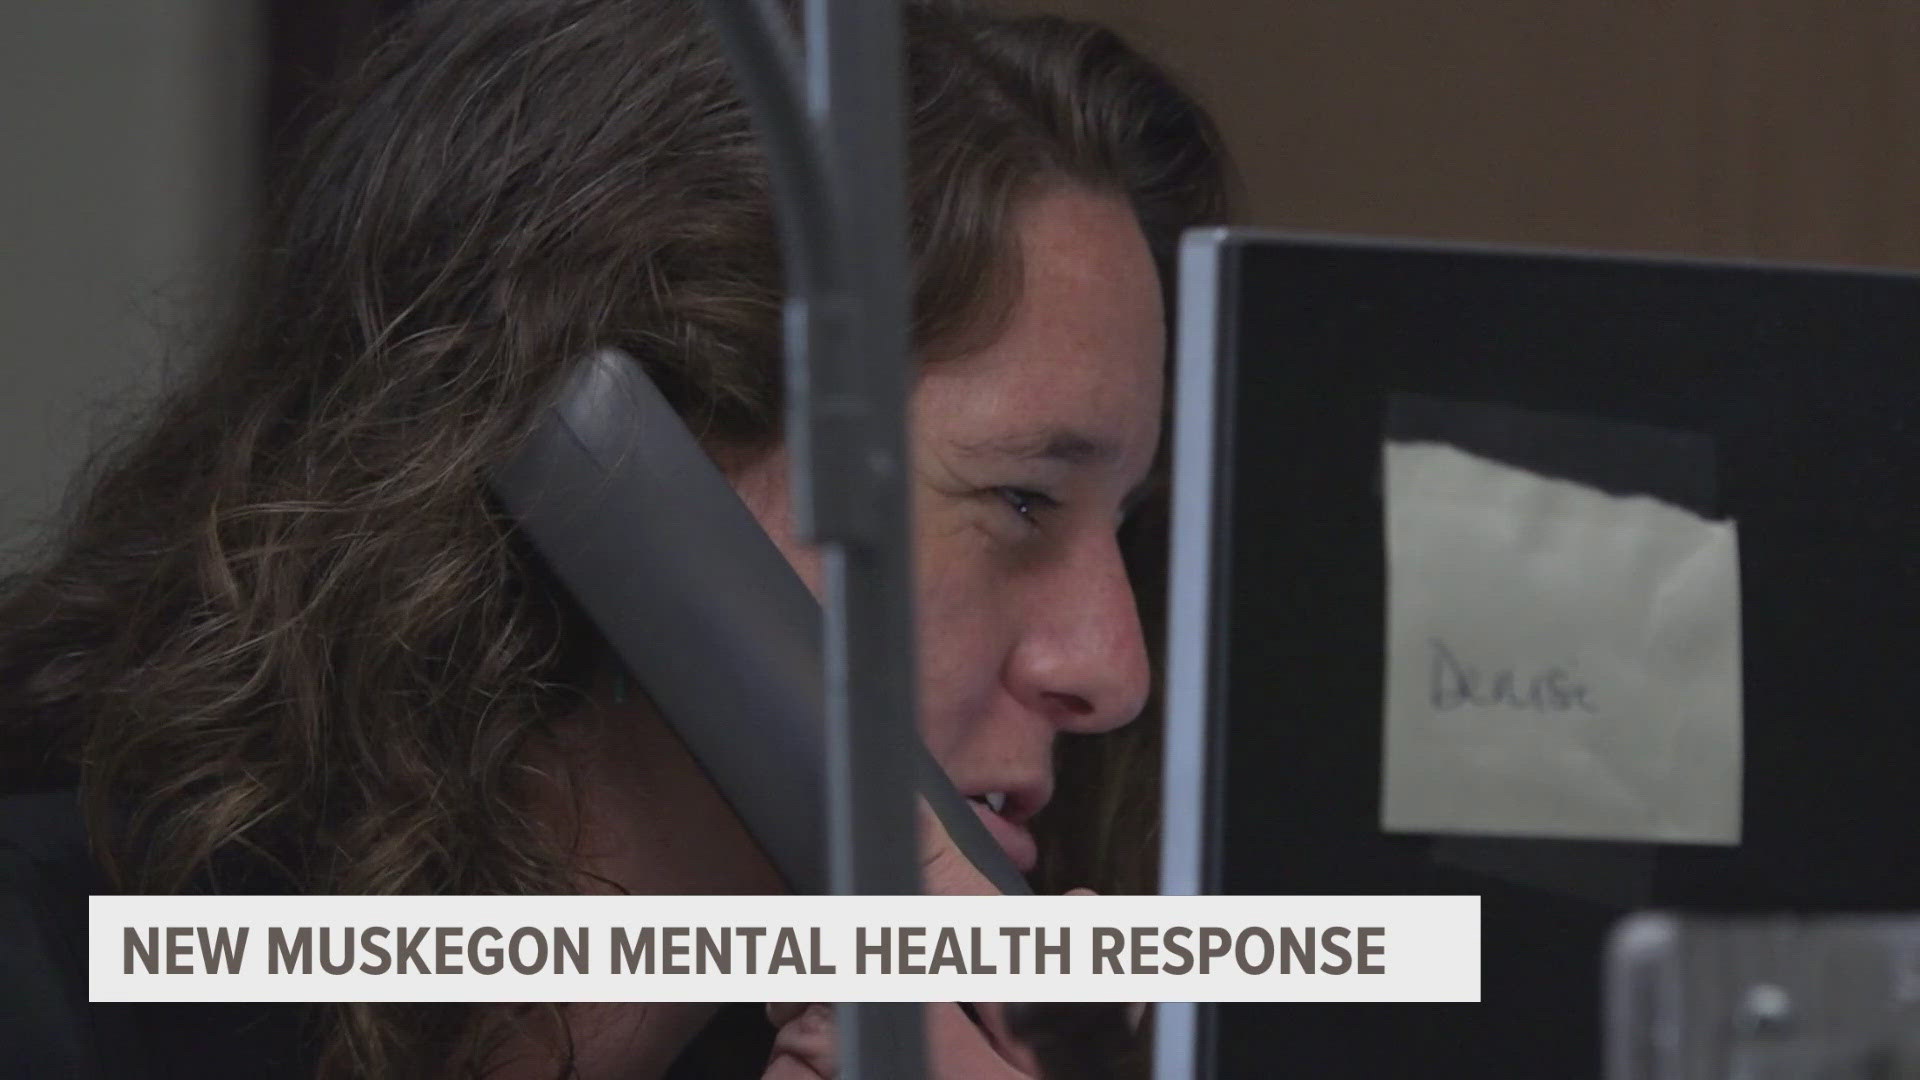 Instead of an ambulance responding to a mental health crisis, a team of behavioral health experts will join police in responding.